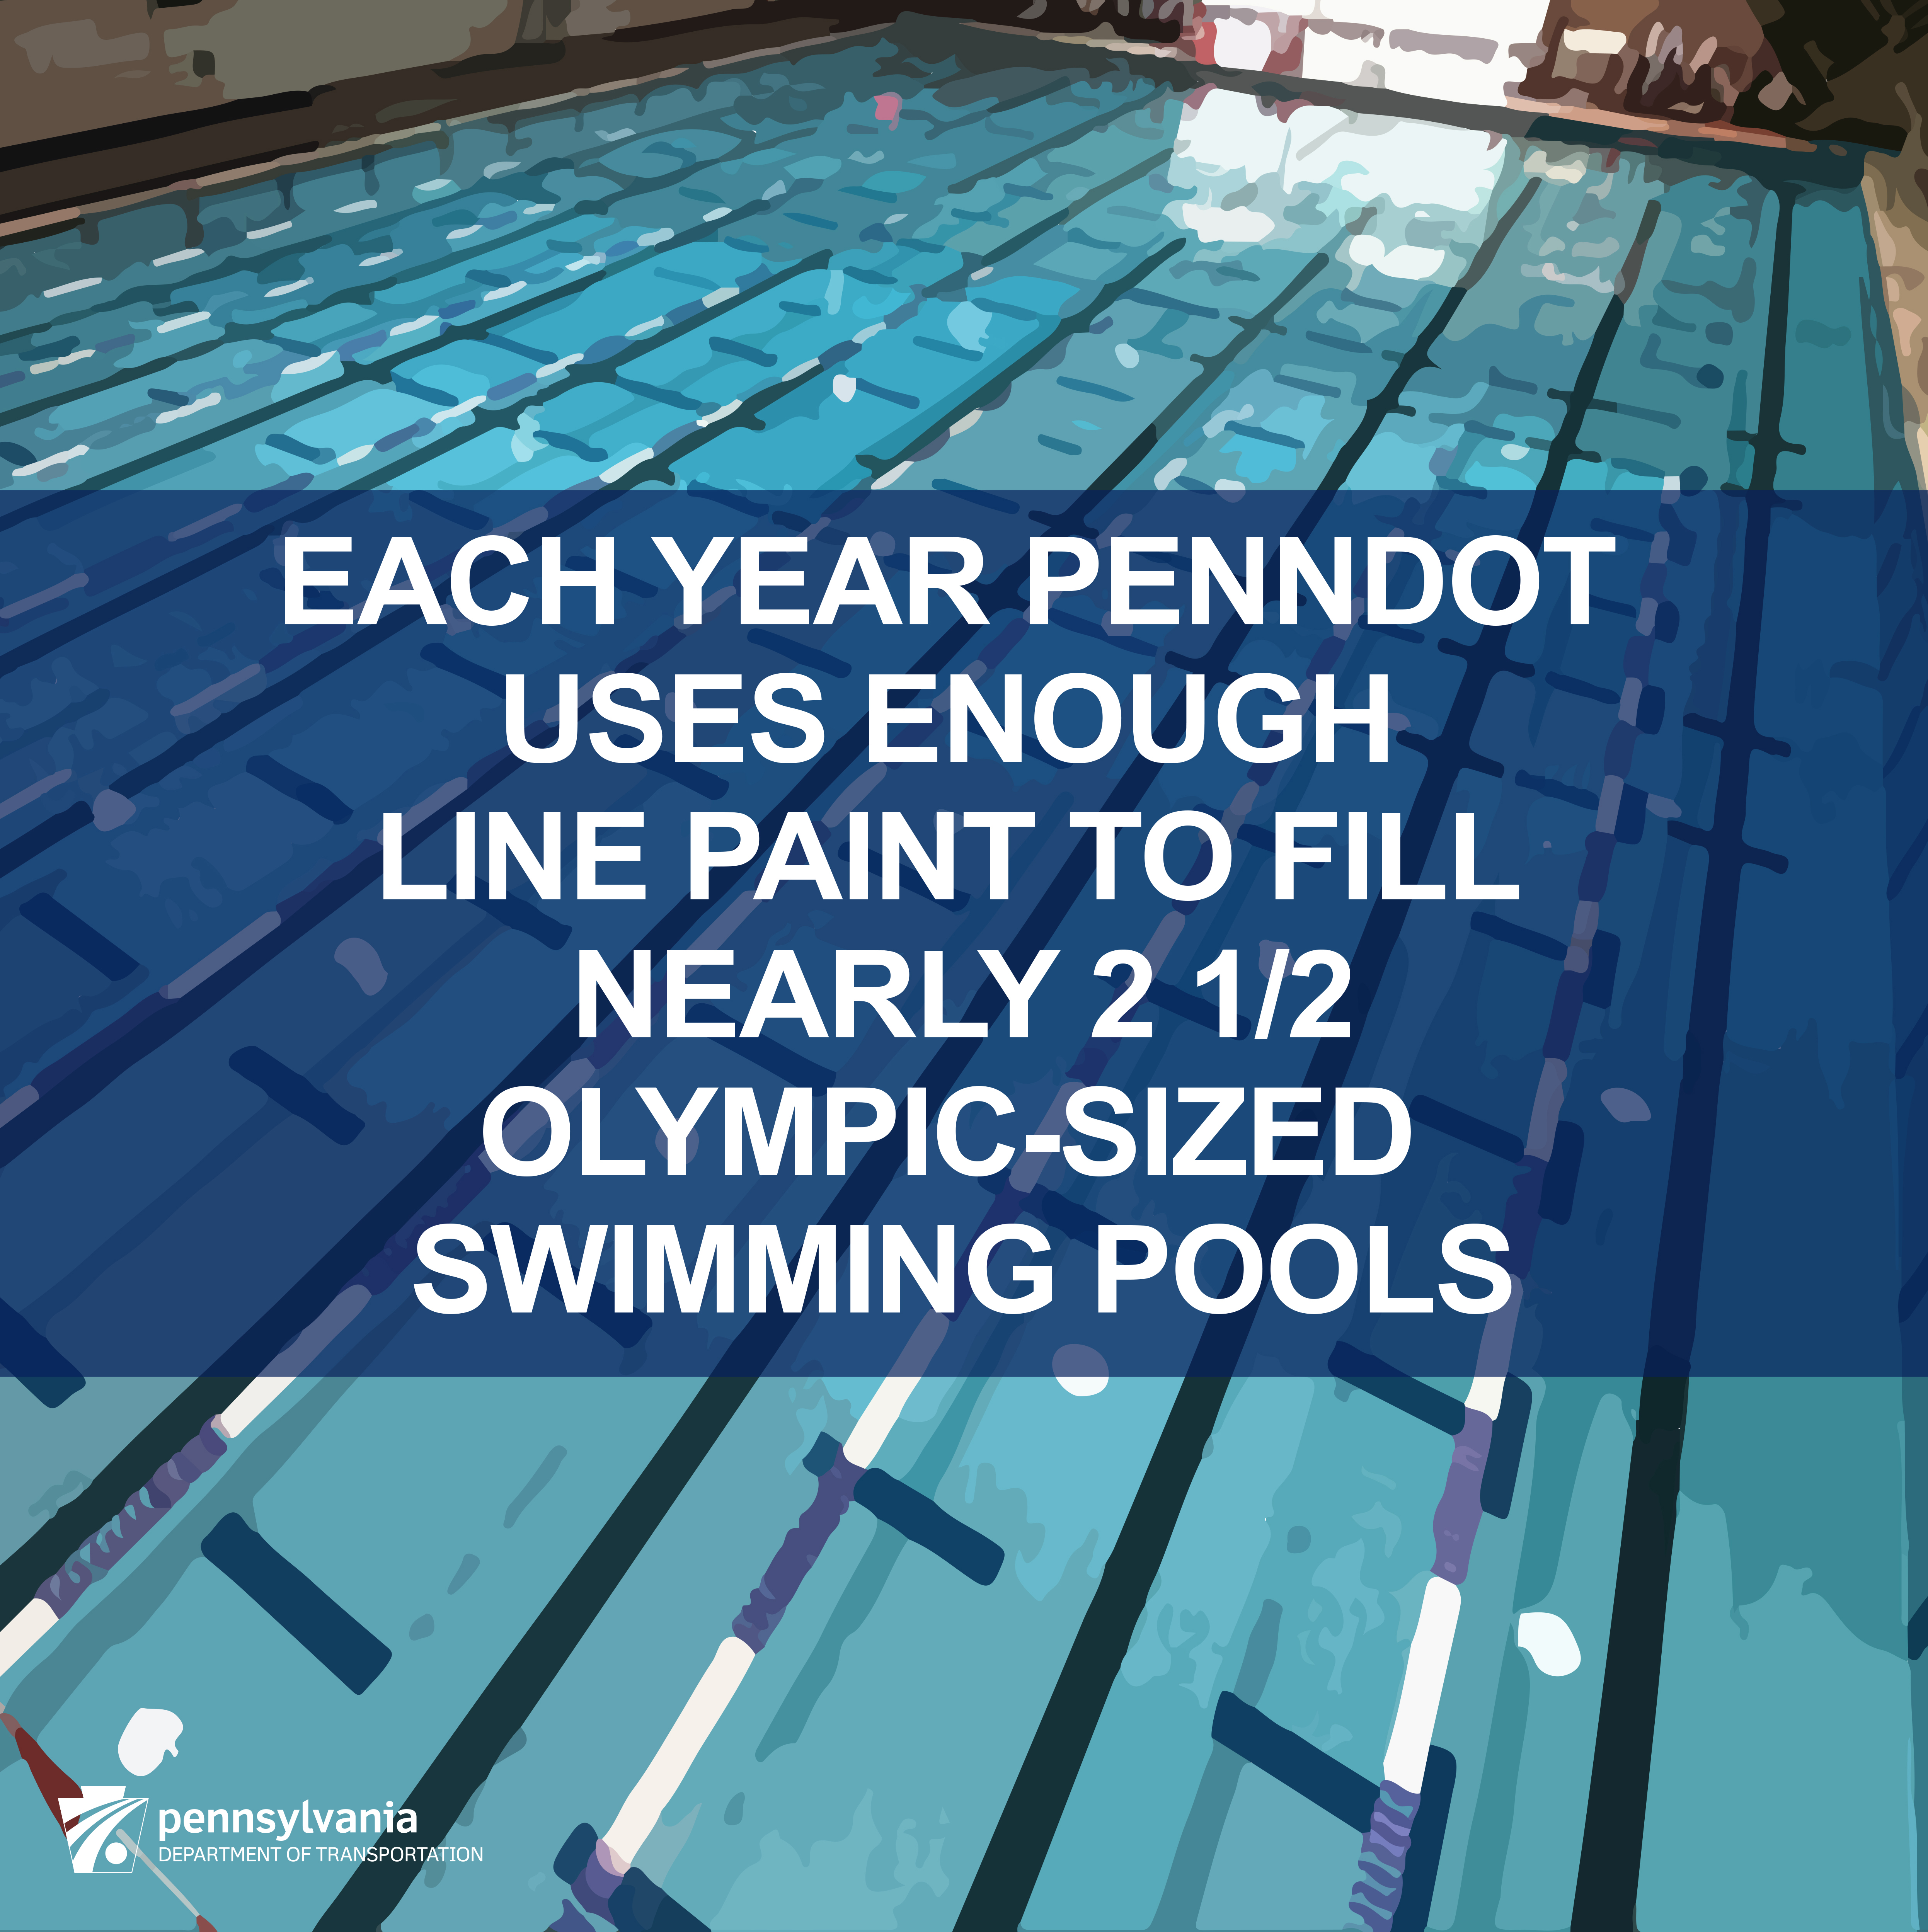 Each year PennDOT uses enough line paint to fill nearly 2 1/2 Olympic-sized swimming pools infographic.